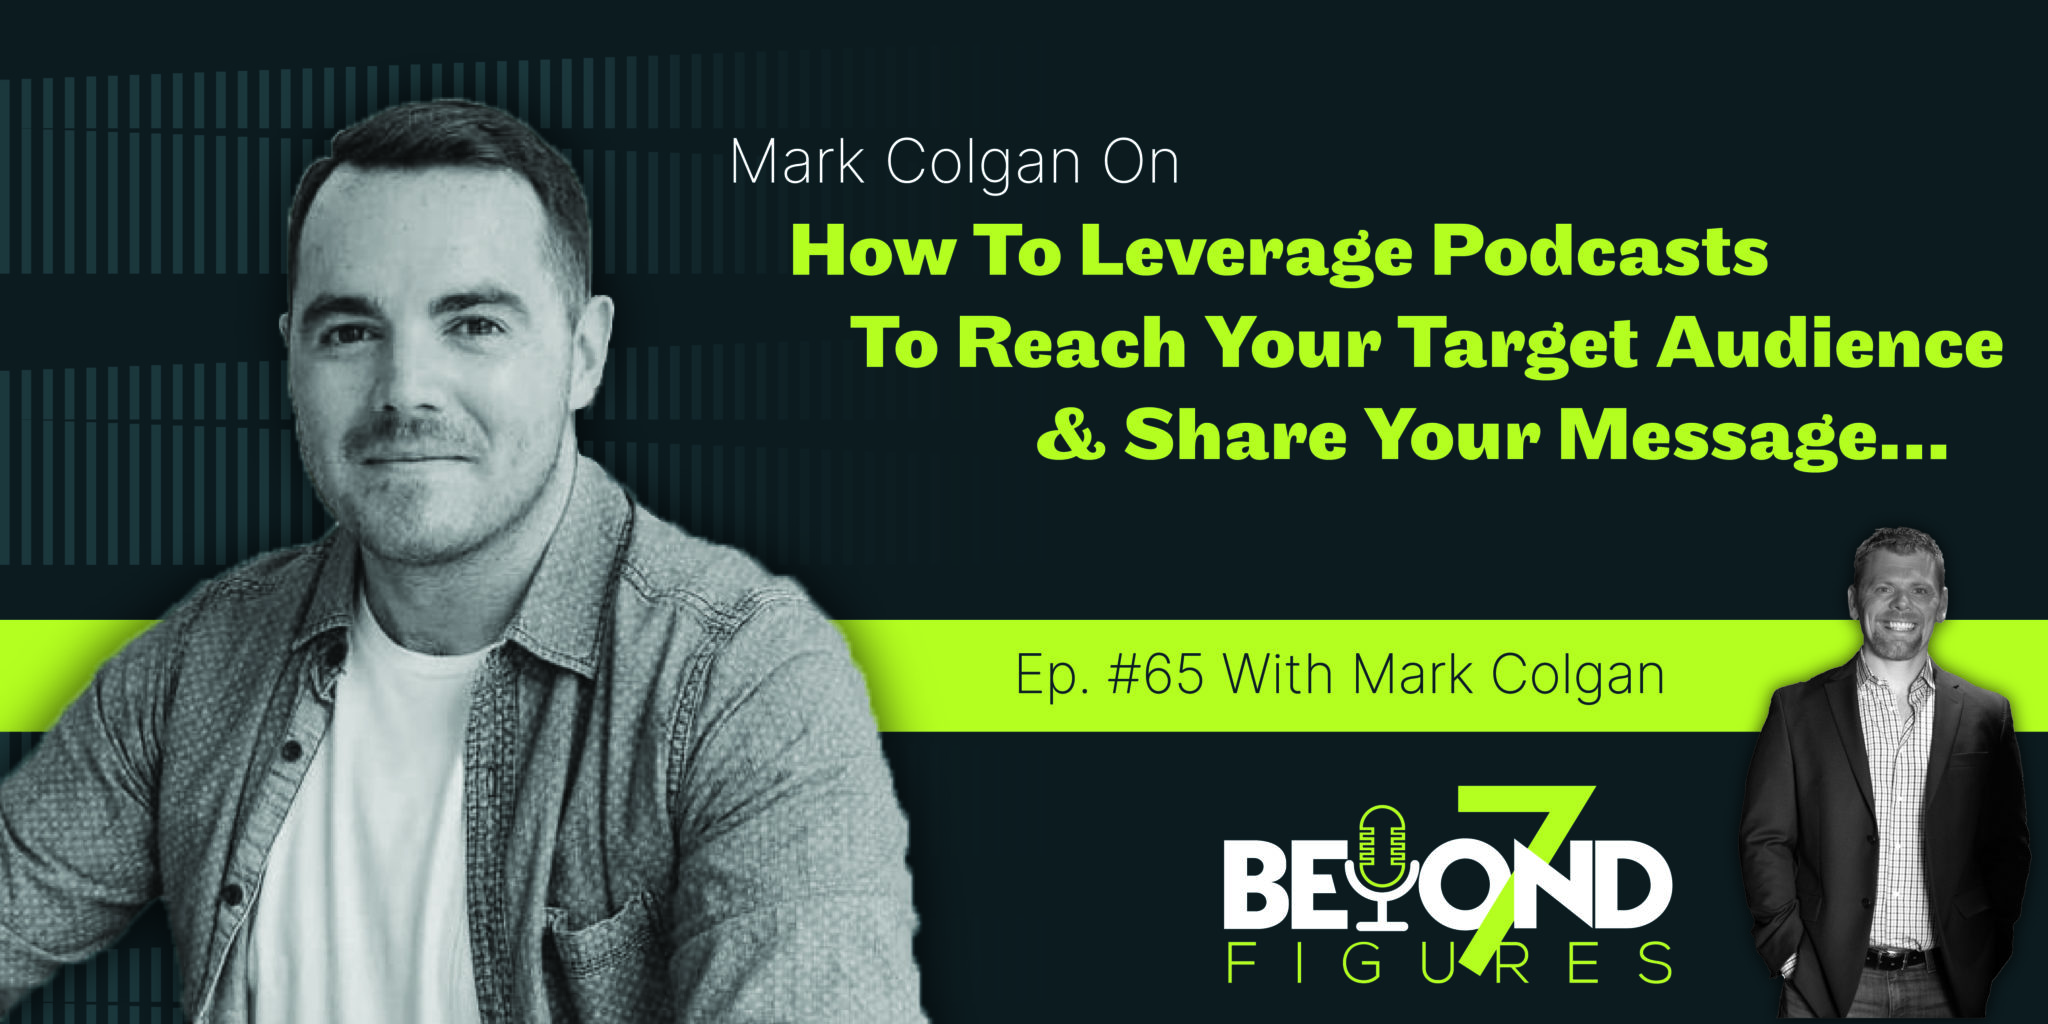 Mark Colgan On How To Leverage Podcasts To Reach Your Target Audience ...